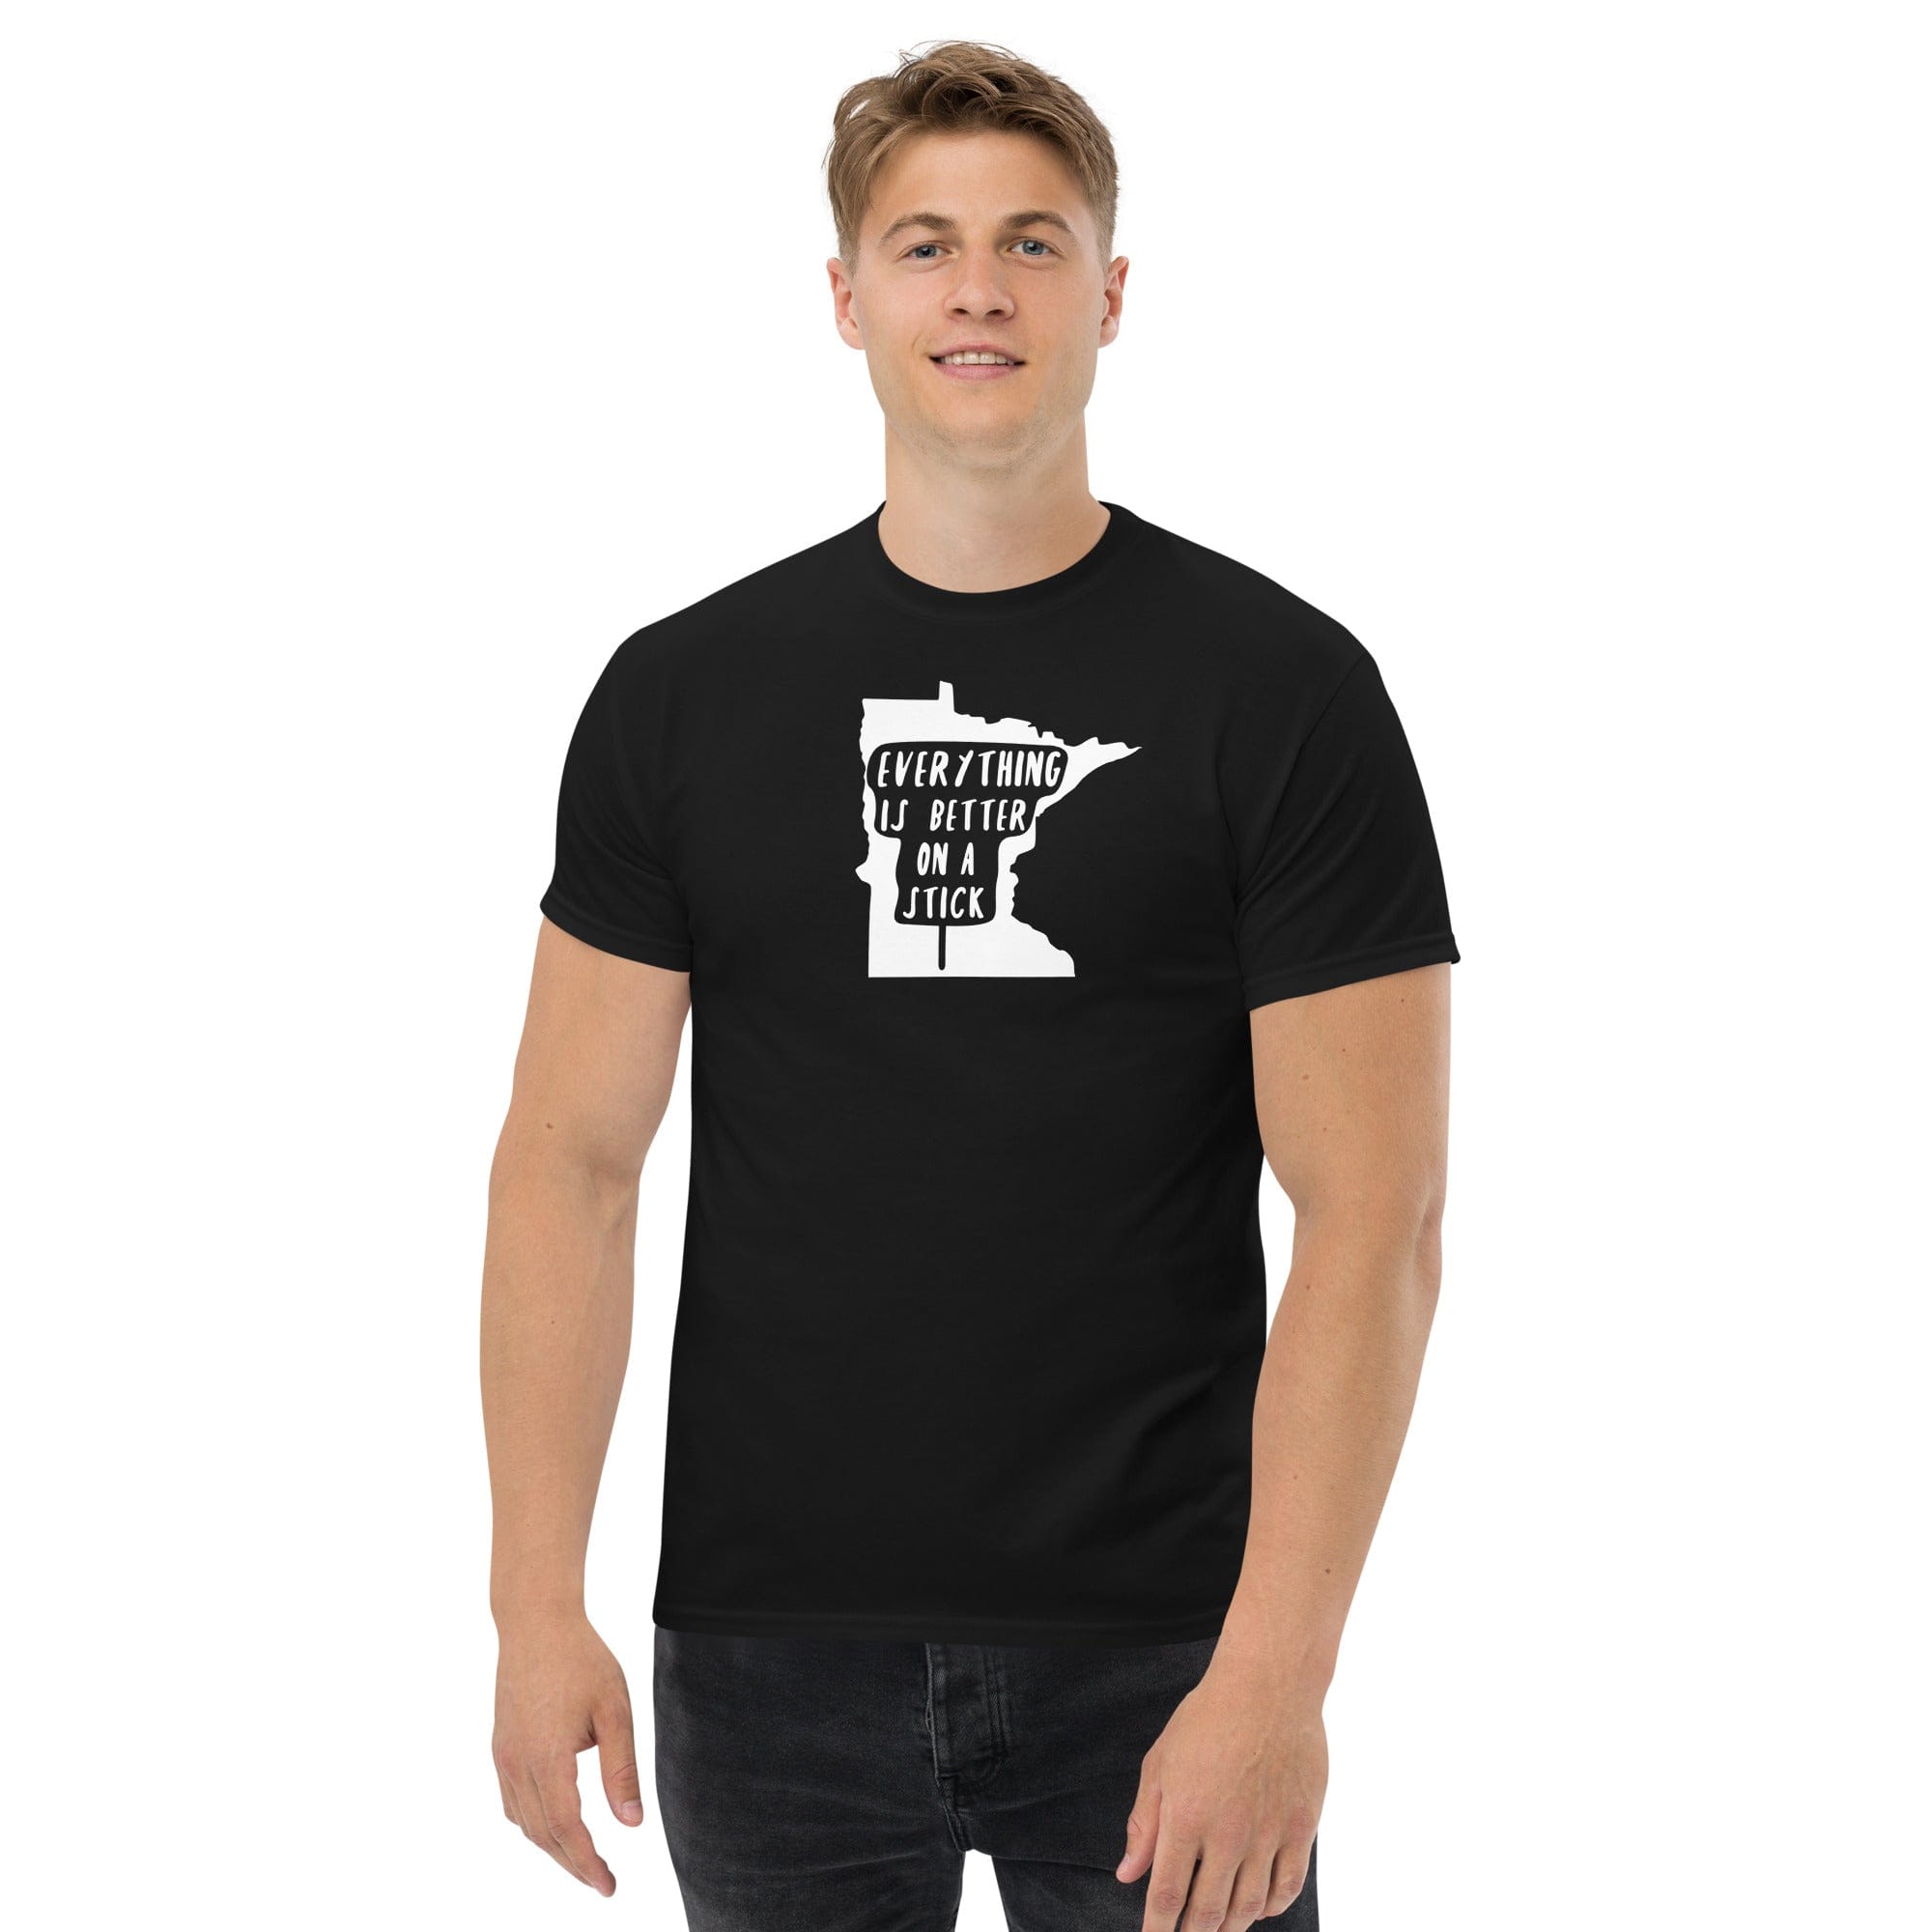 Minnesota State Fair "Everything Is Better on a Stick" Men's Classic Tee ThatMNLife Black / S Minnesota Custom T-Shirts and Gifts